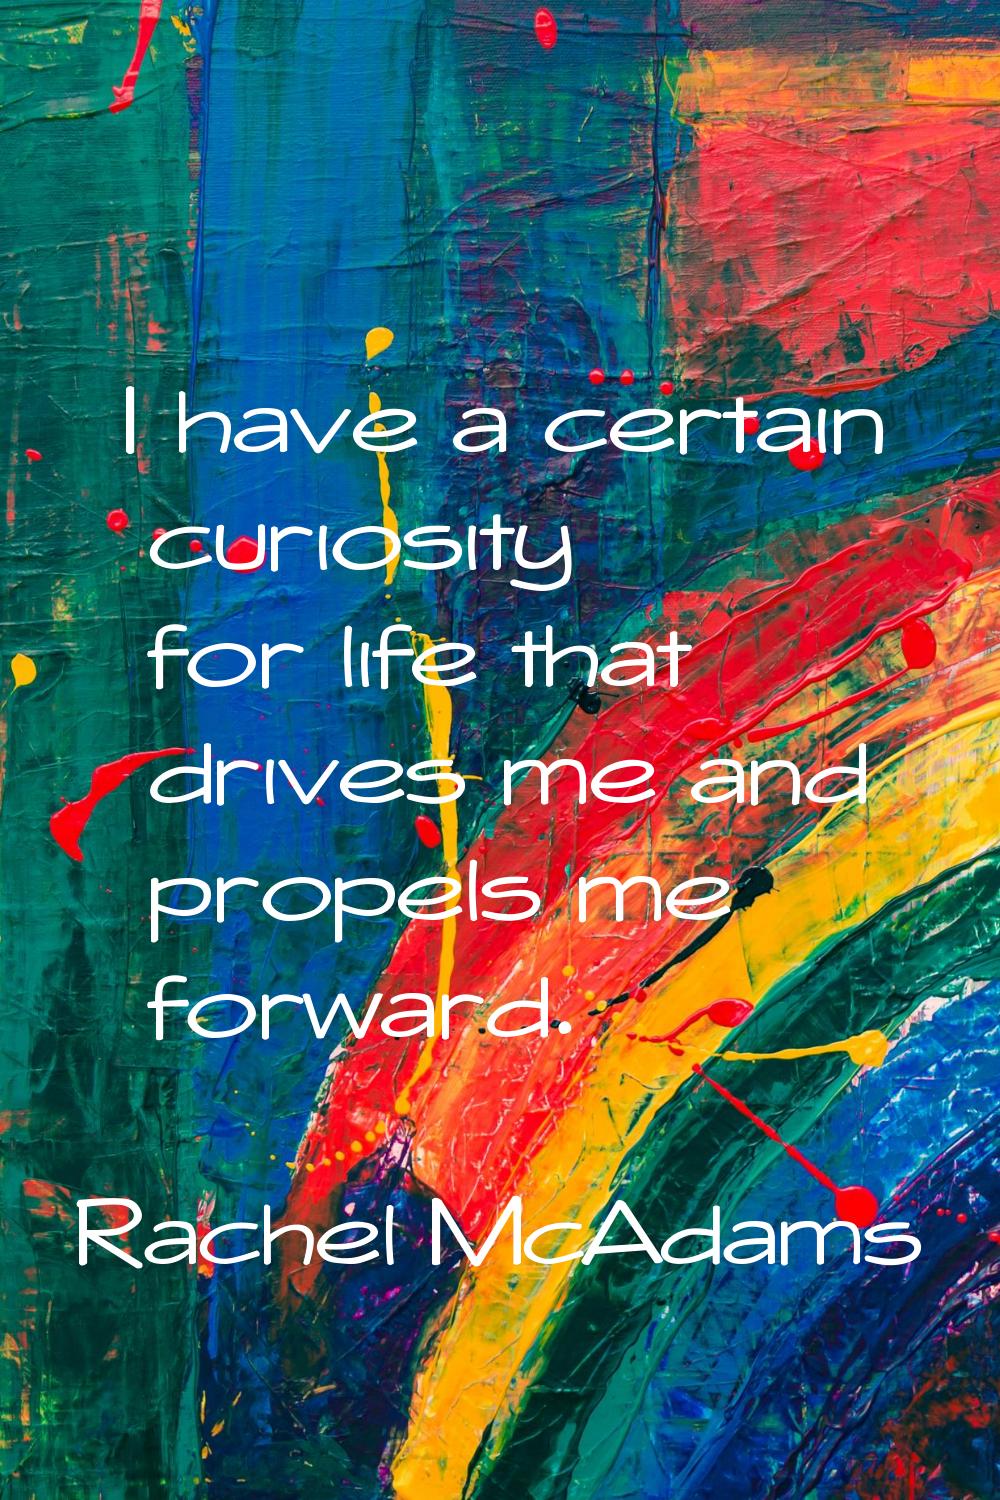 I have a certain curiosity for life that drives me and propels me forward.